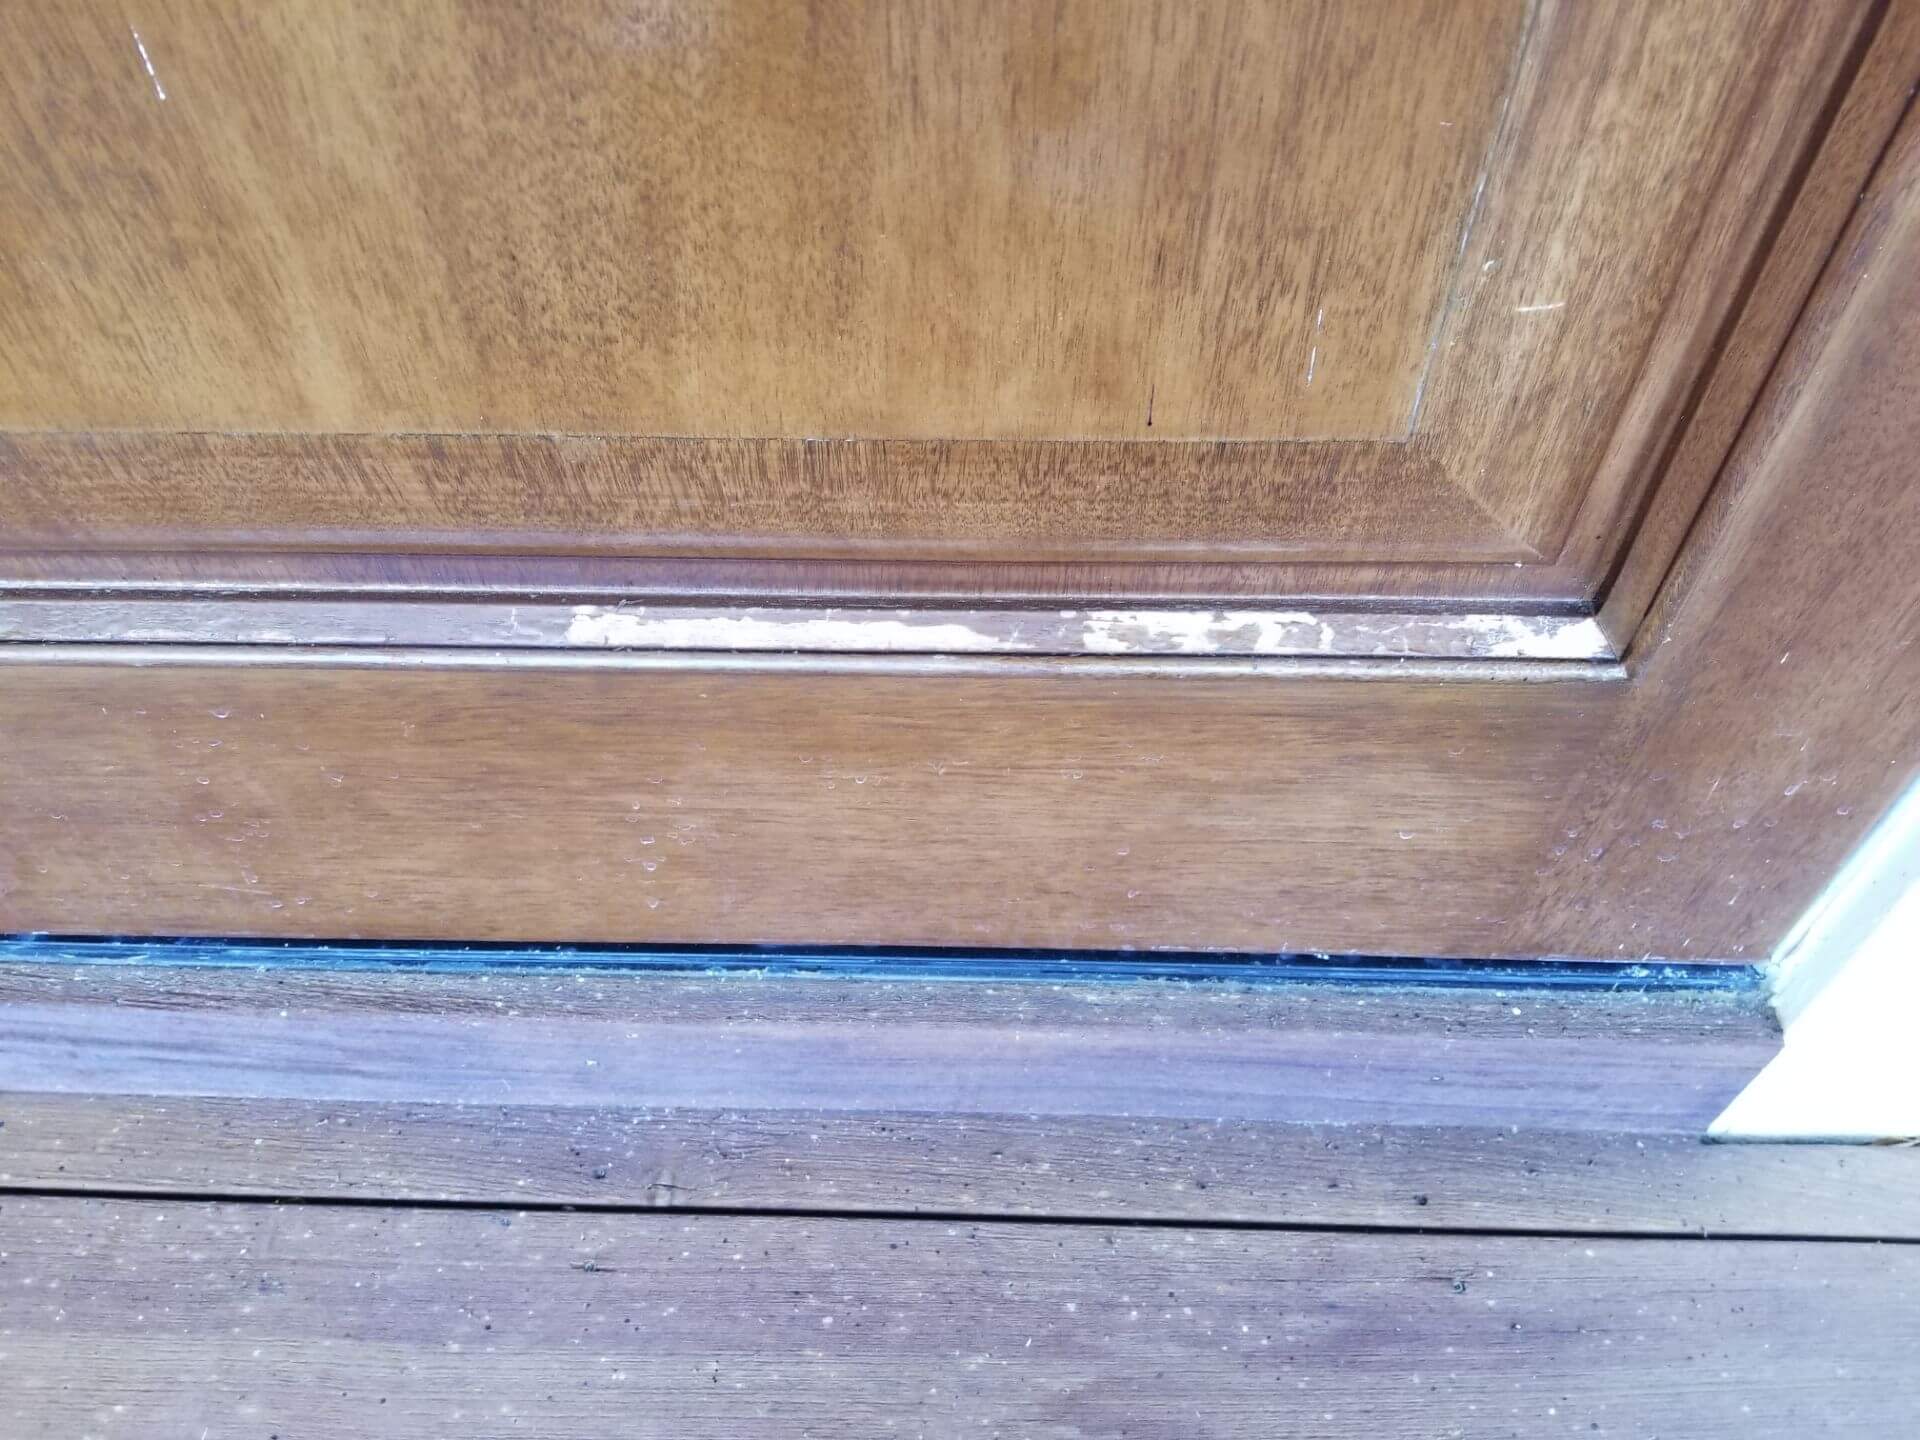 closer look at the doorframe